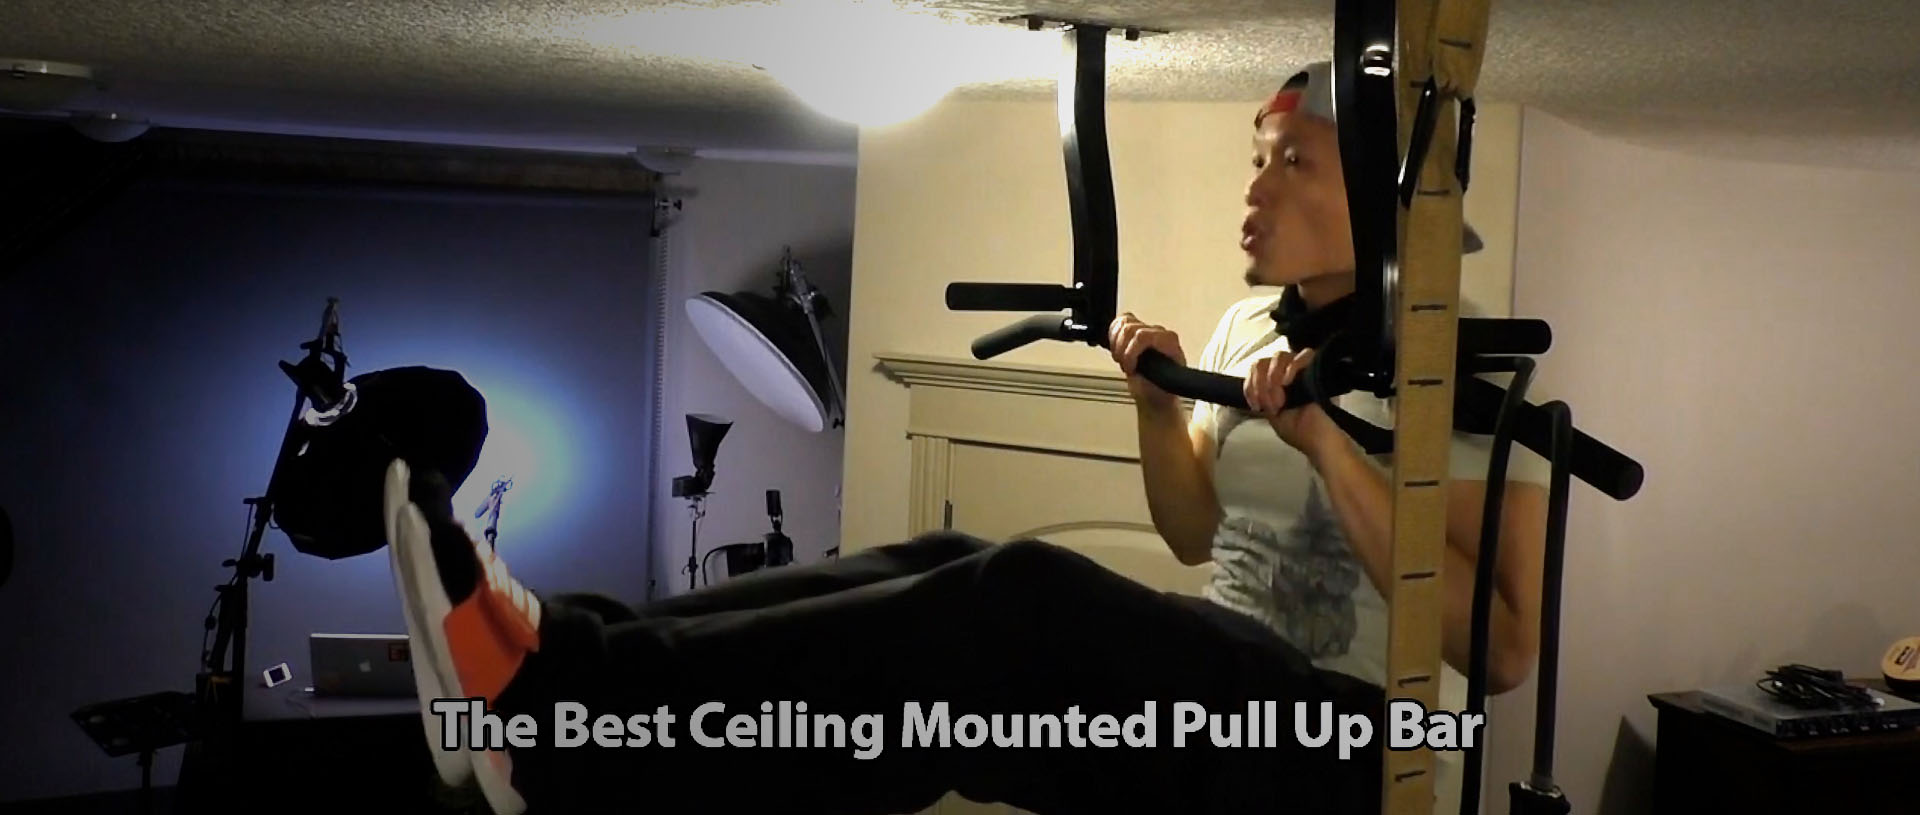 The Best Ceiling Mounted Pull Up Bar Not So Ancient Chinese Secrets